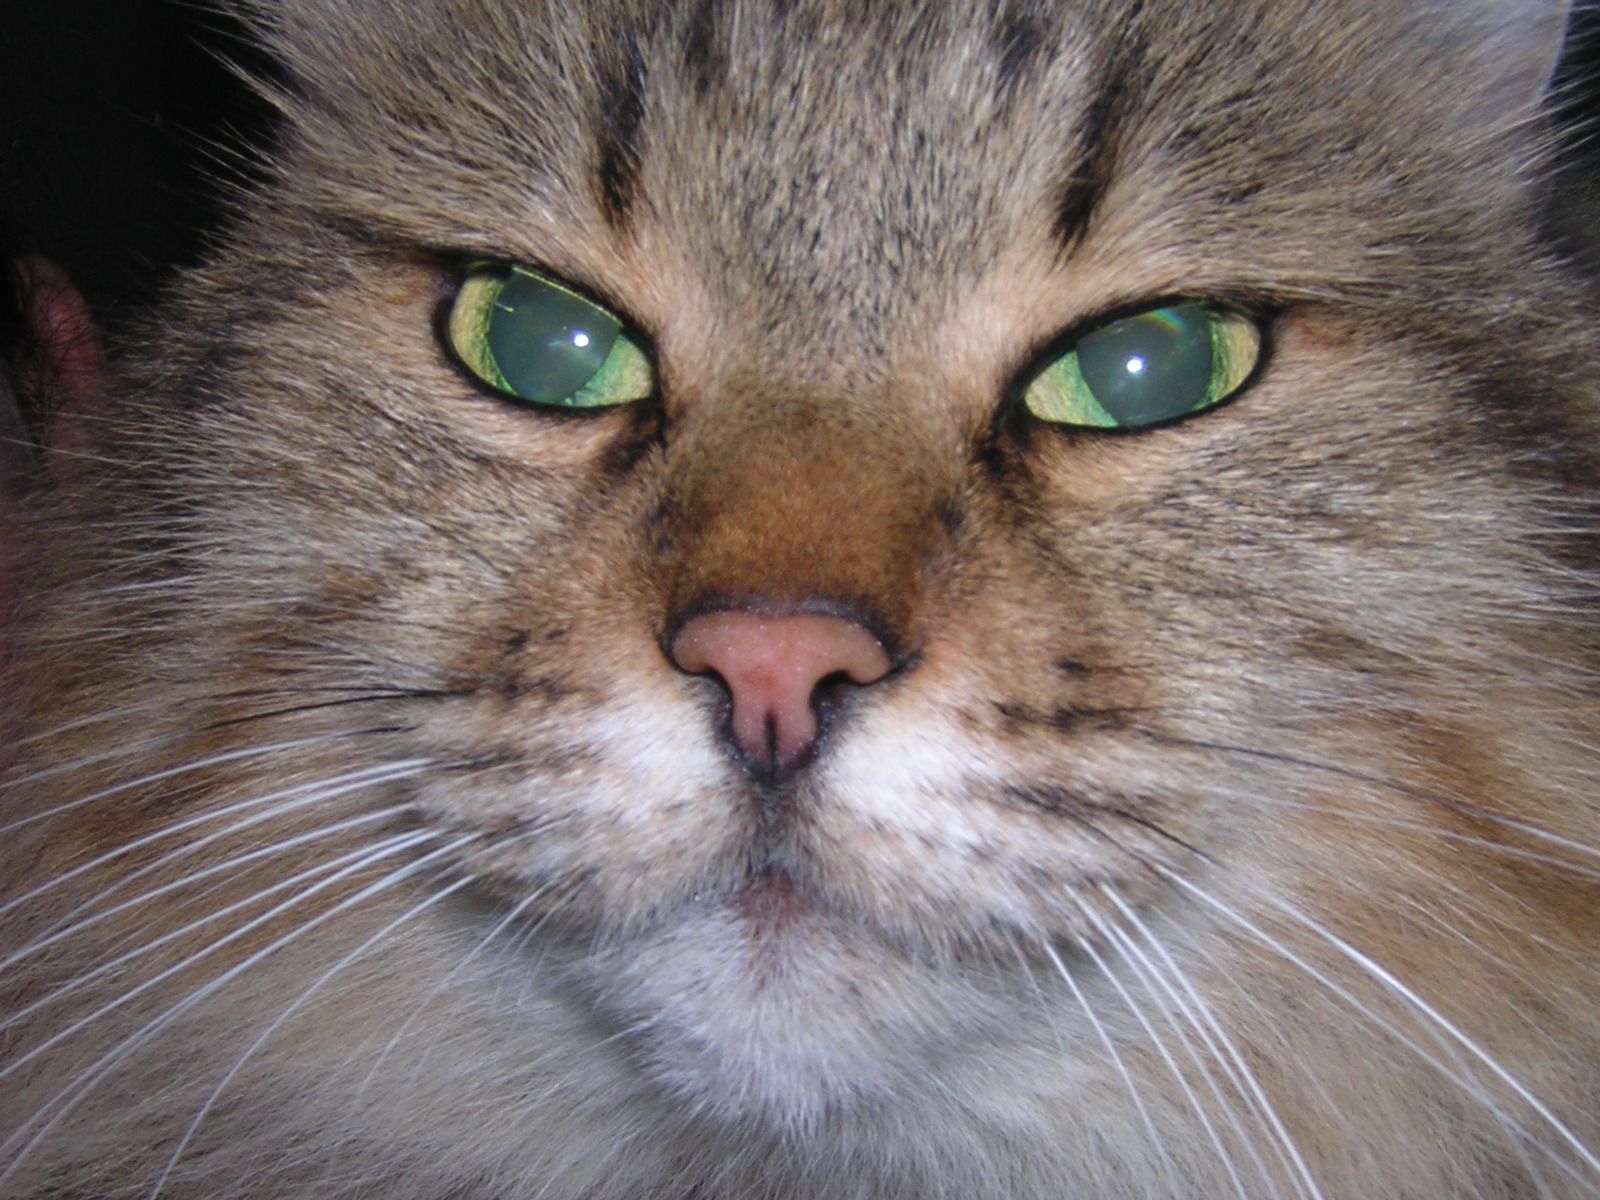 this is an image of a fluffy cat with green eyes